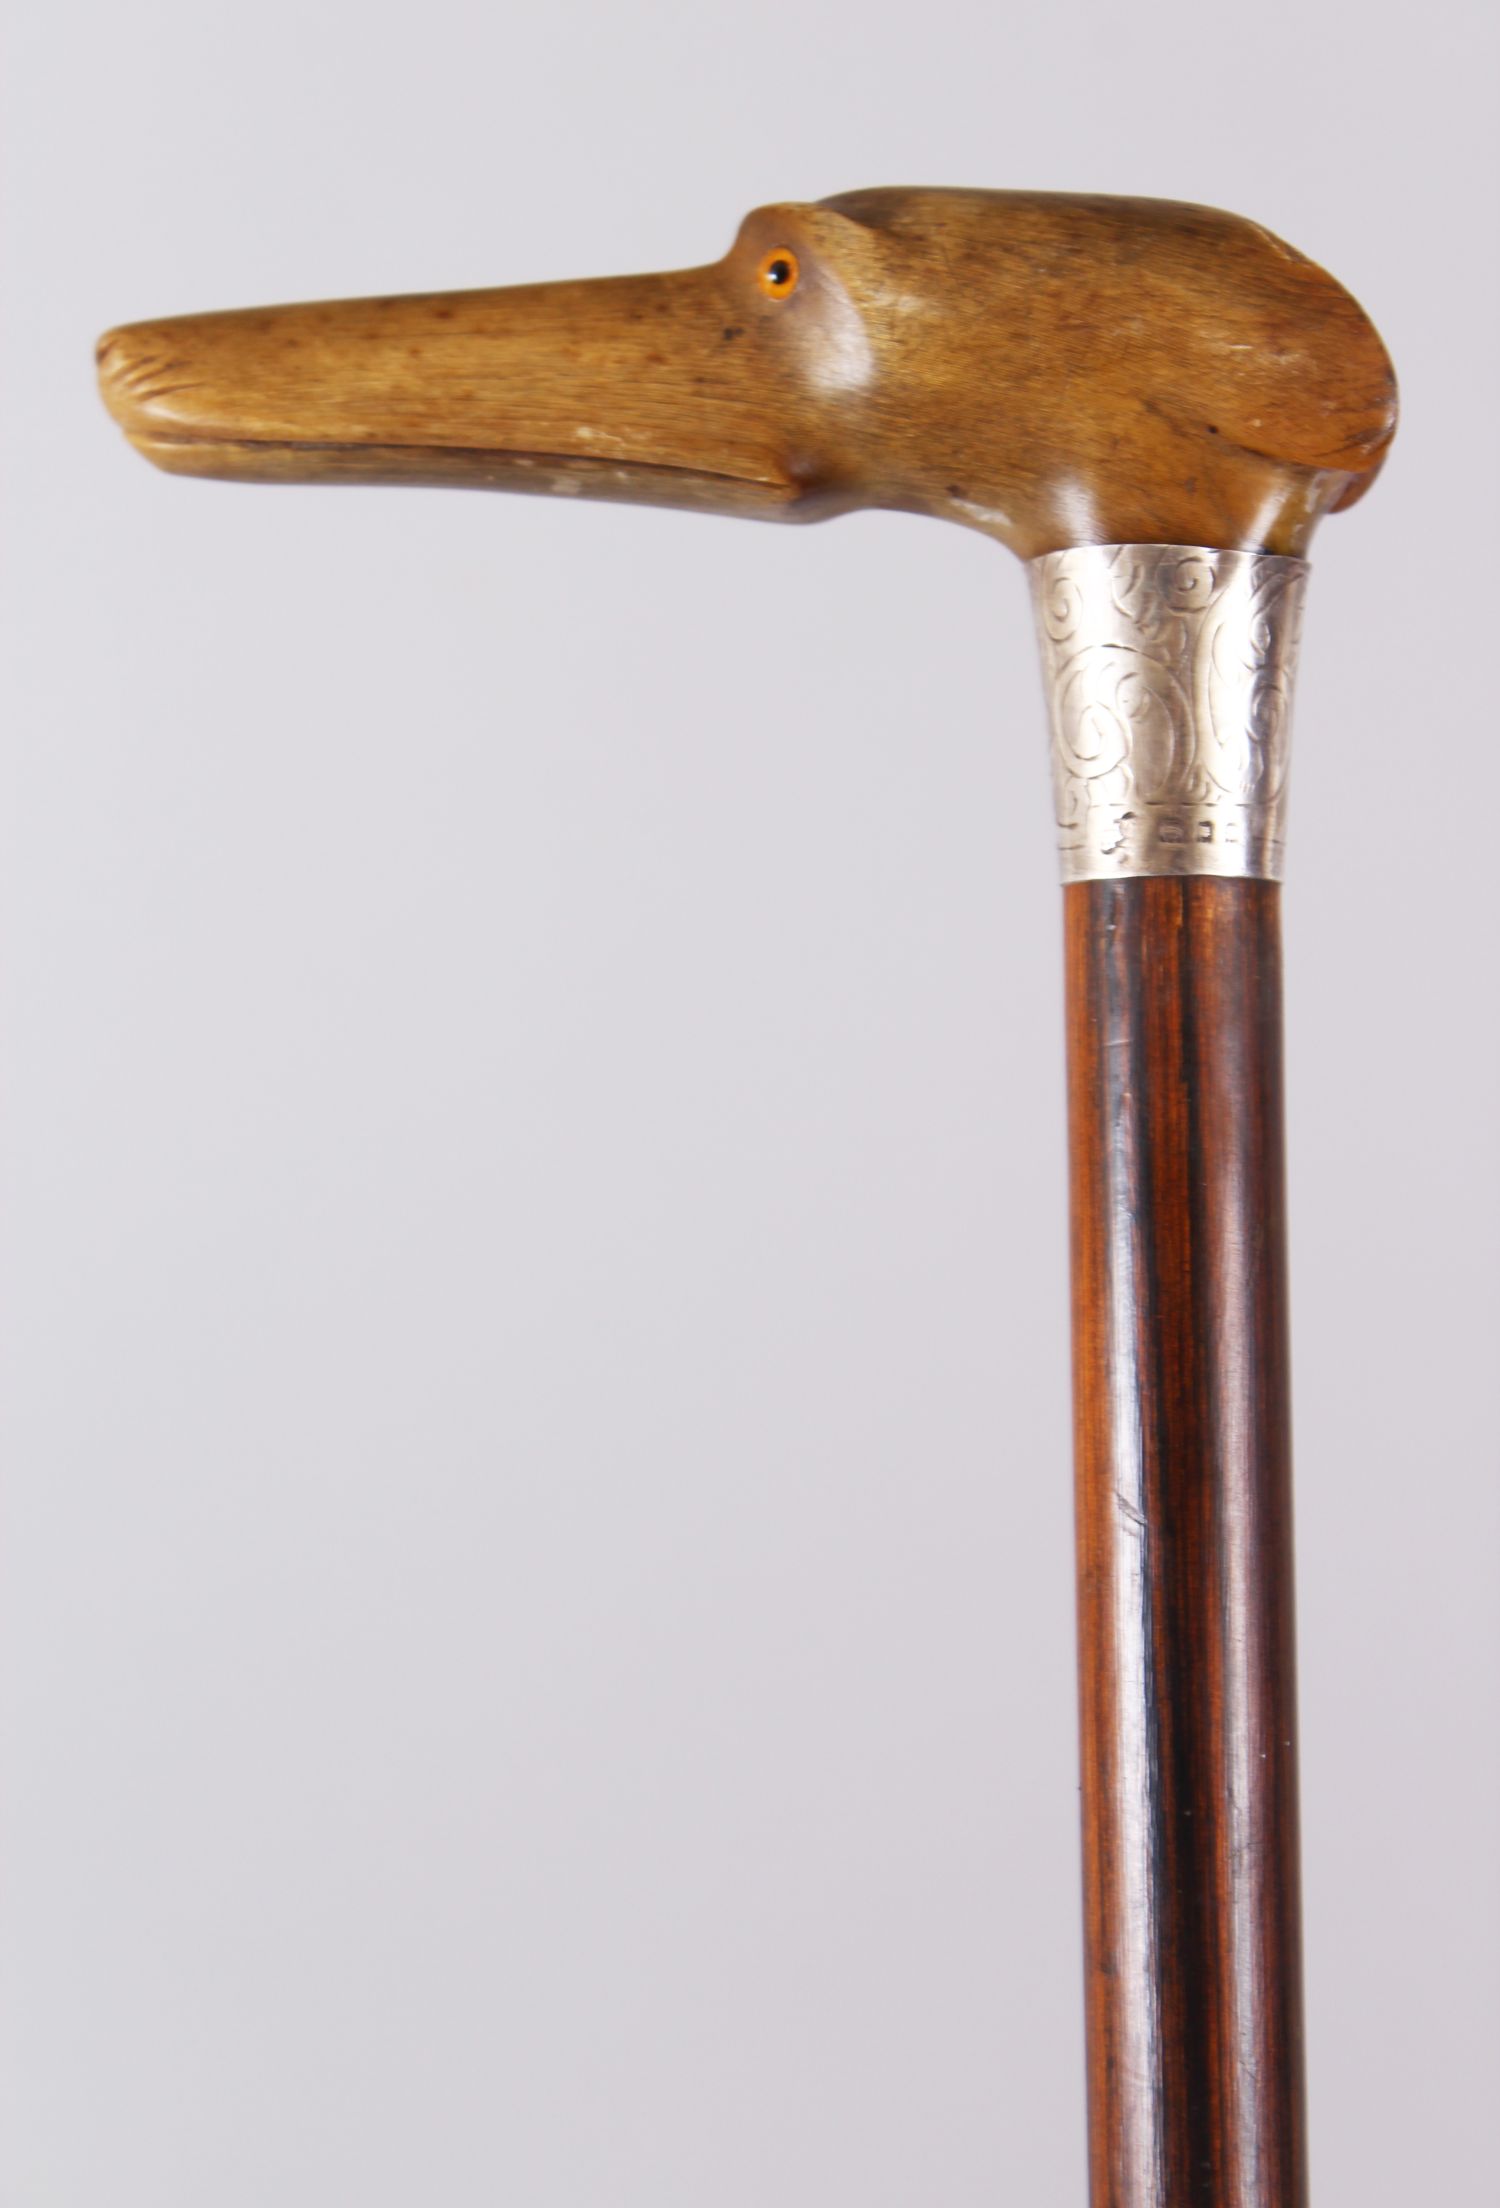 A RHINO HANDLED CANE, carved as a dog with silver band, 93cm long.